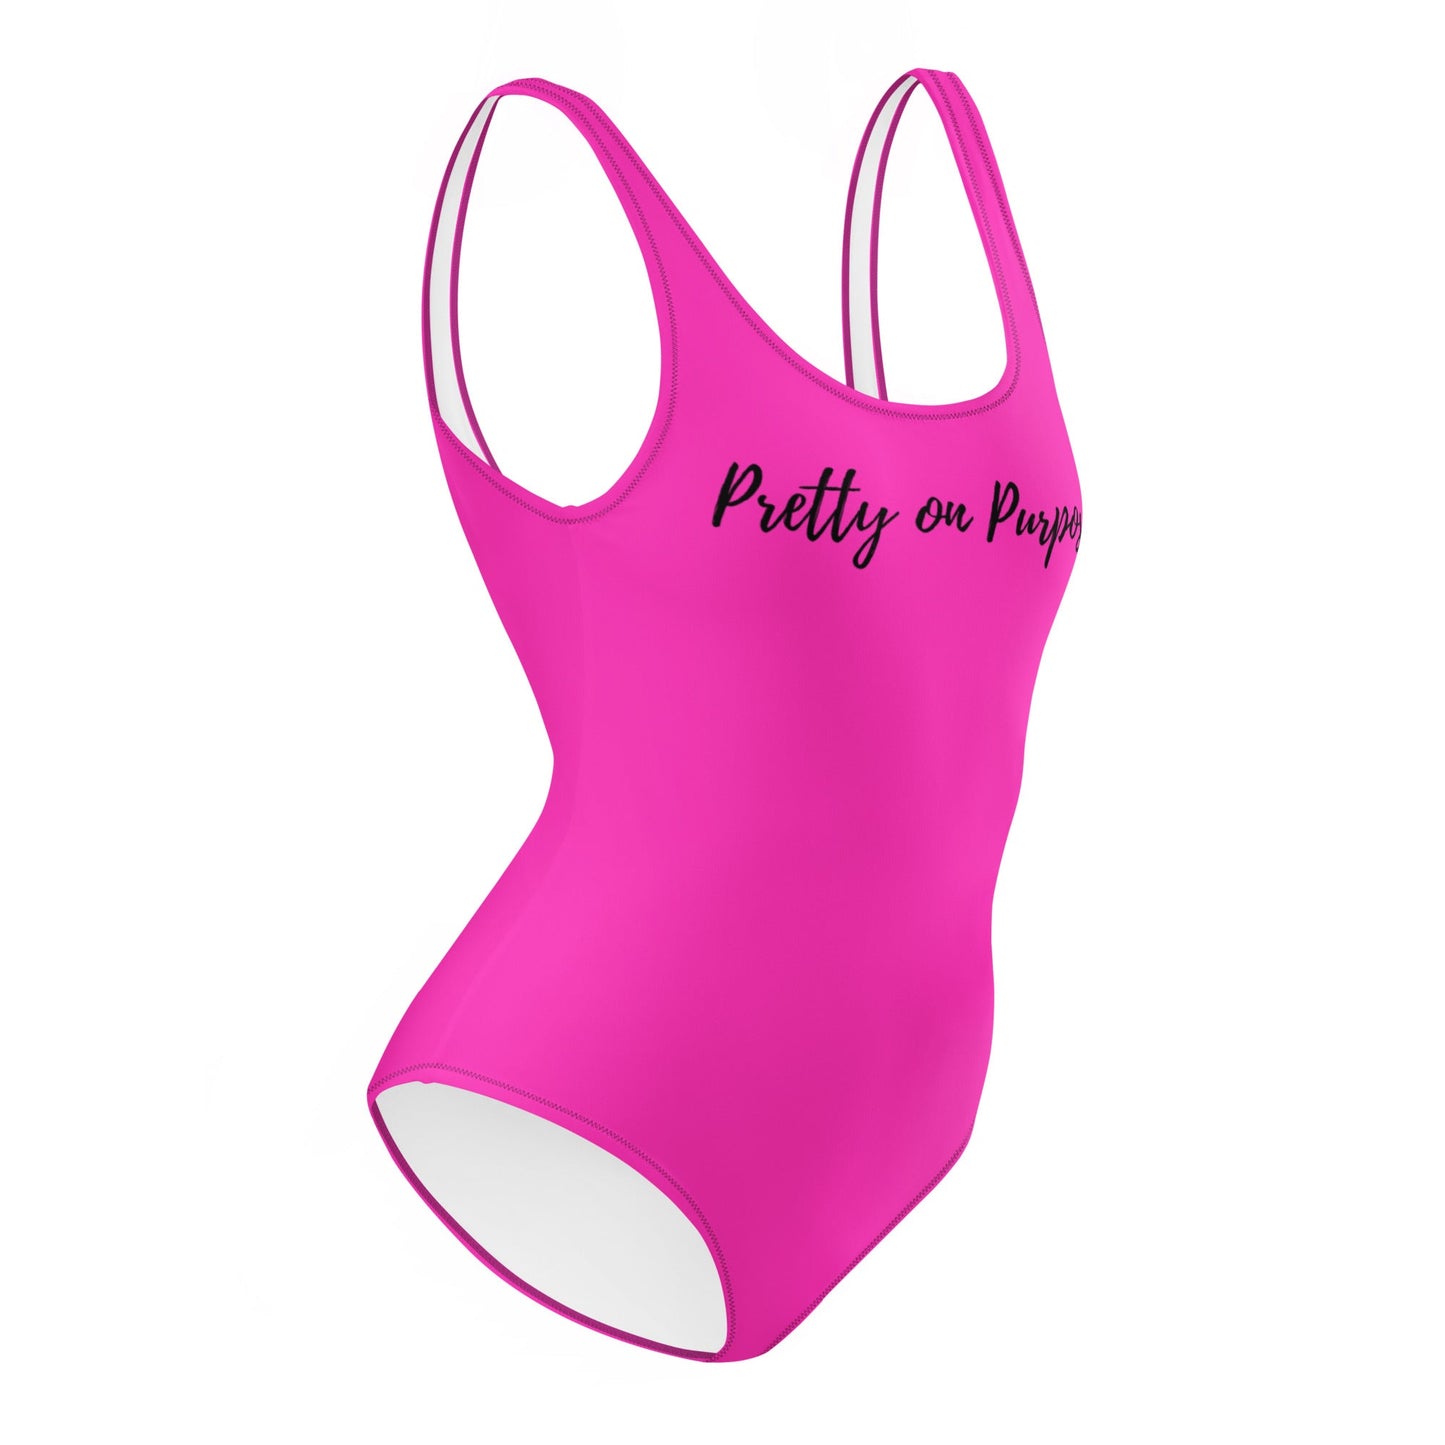 Pretty on Purpose One-Piece Swimsuit - Catch This Tea Shirts